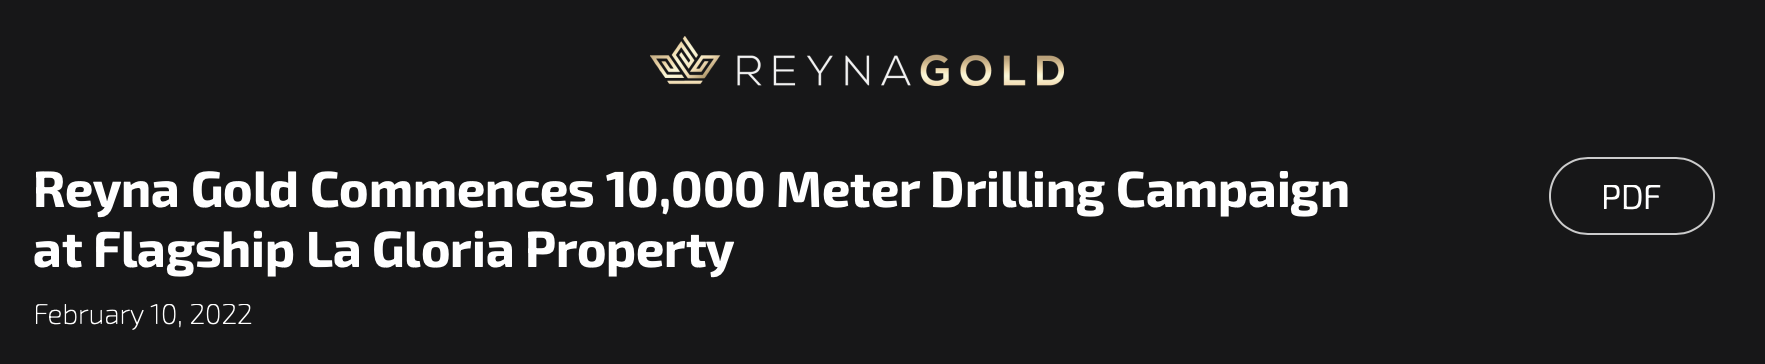 Reyna Gold Commences 10,000 Meter Drilling Campaign at Flagship La Gloria Property. March 19th, 2022, Gold Chartbook - Potential recovery to approx. US$2,000. 